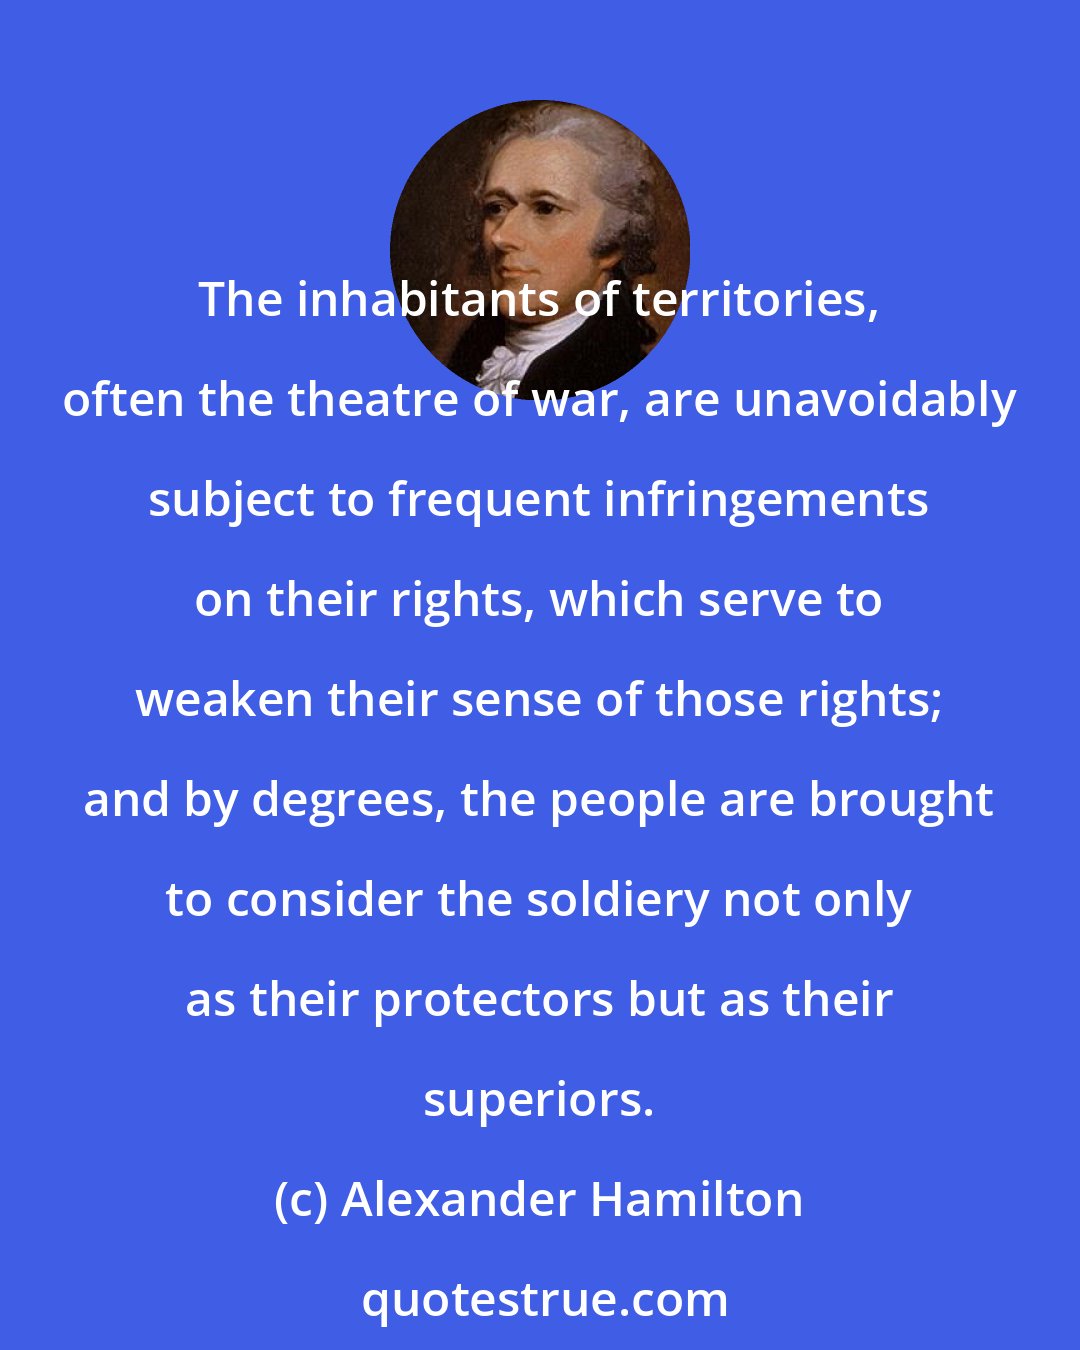 Alexander Hamilton: The inhabitants of territories, often the theatre of war, are unavoidably subject to frequent infringements on their rights, which serve to weaken their sense of those rights; and by degrees, the people are brought to consider the soldiery not only as their protectors but as their superiors.